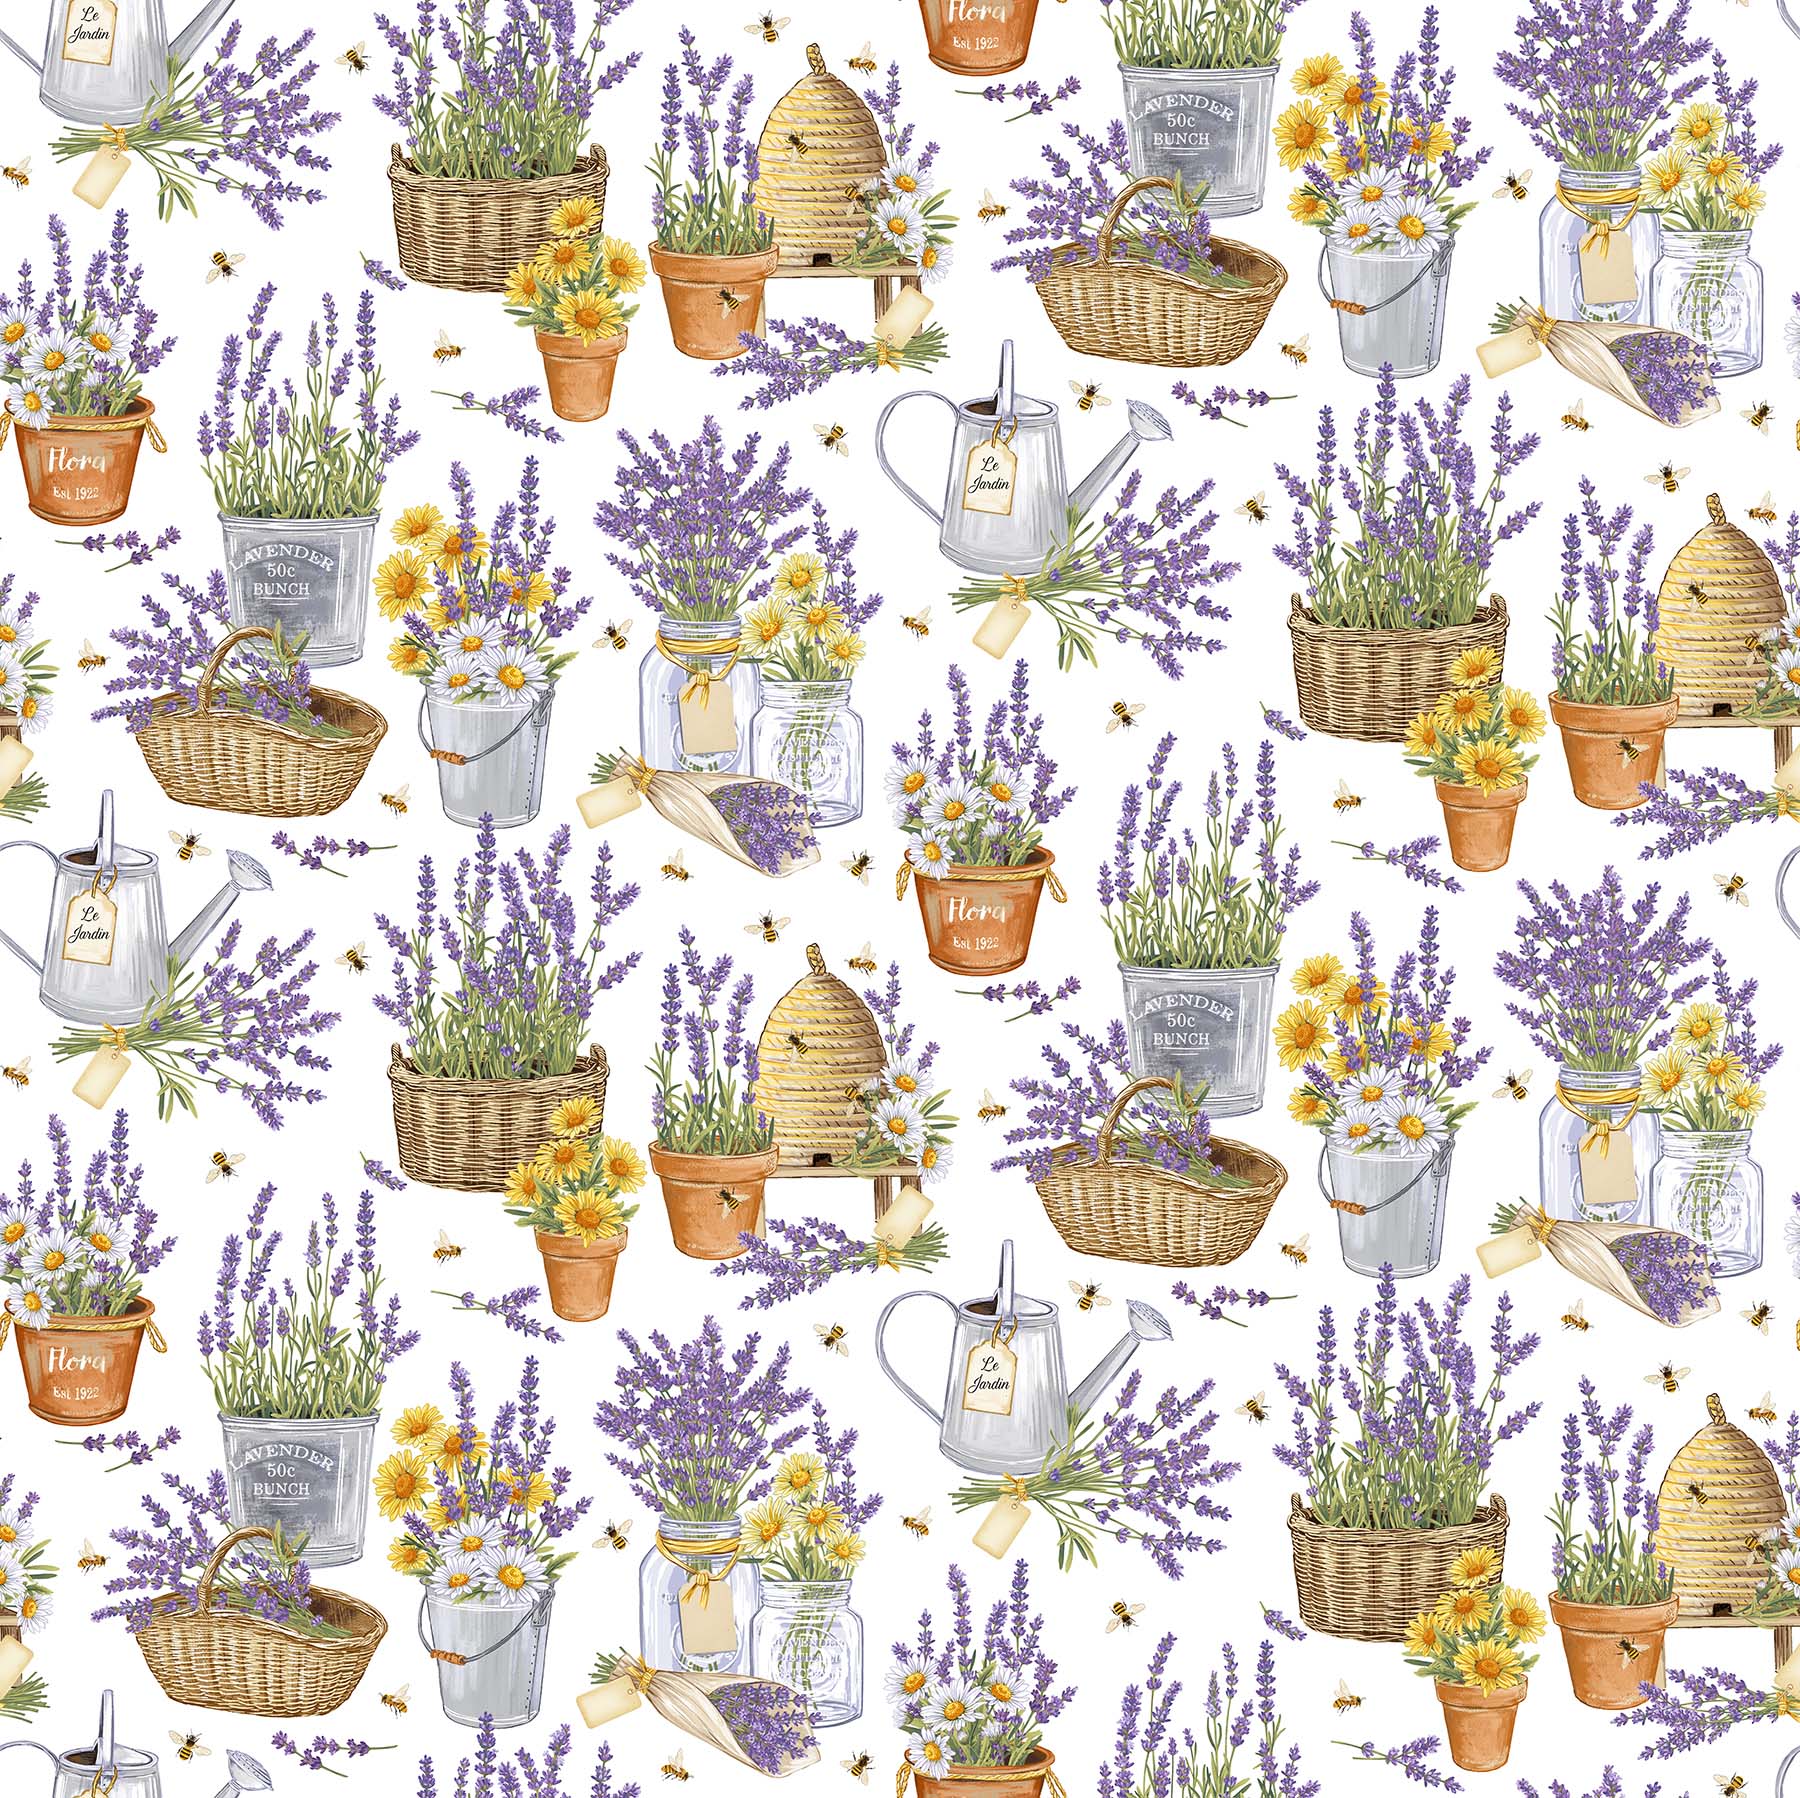 Lavender Market 100% Cotton Fabric - By the Yard - DP24469-10 - Lavender Feature  - White Multi